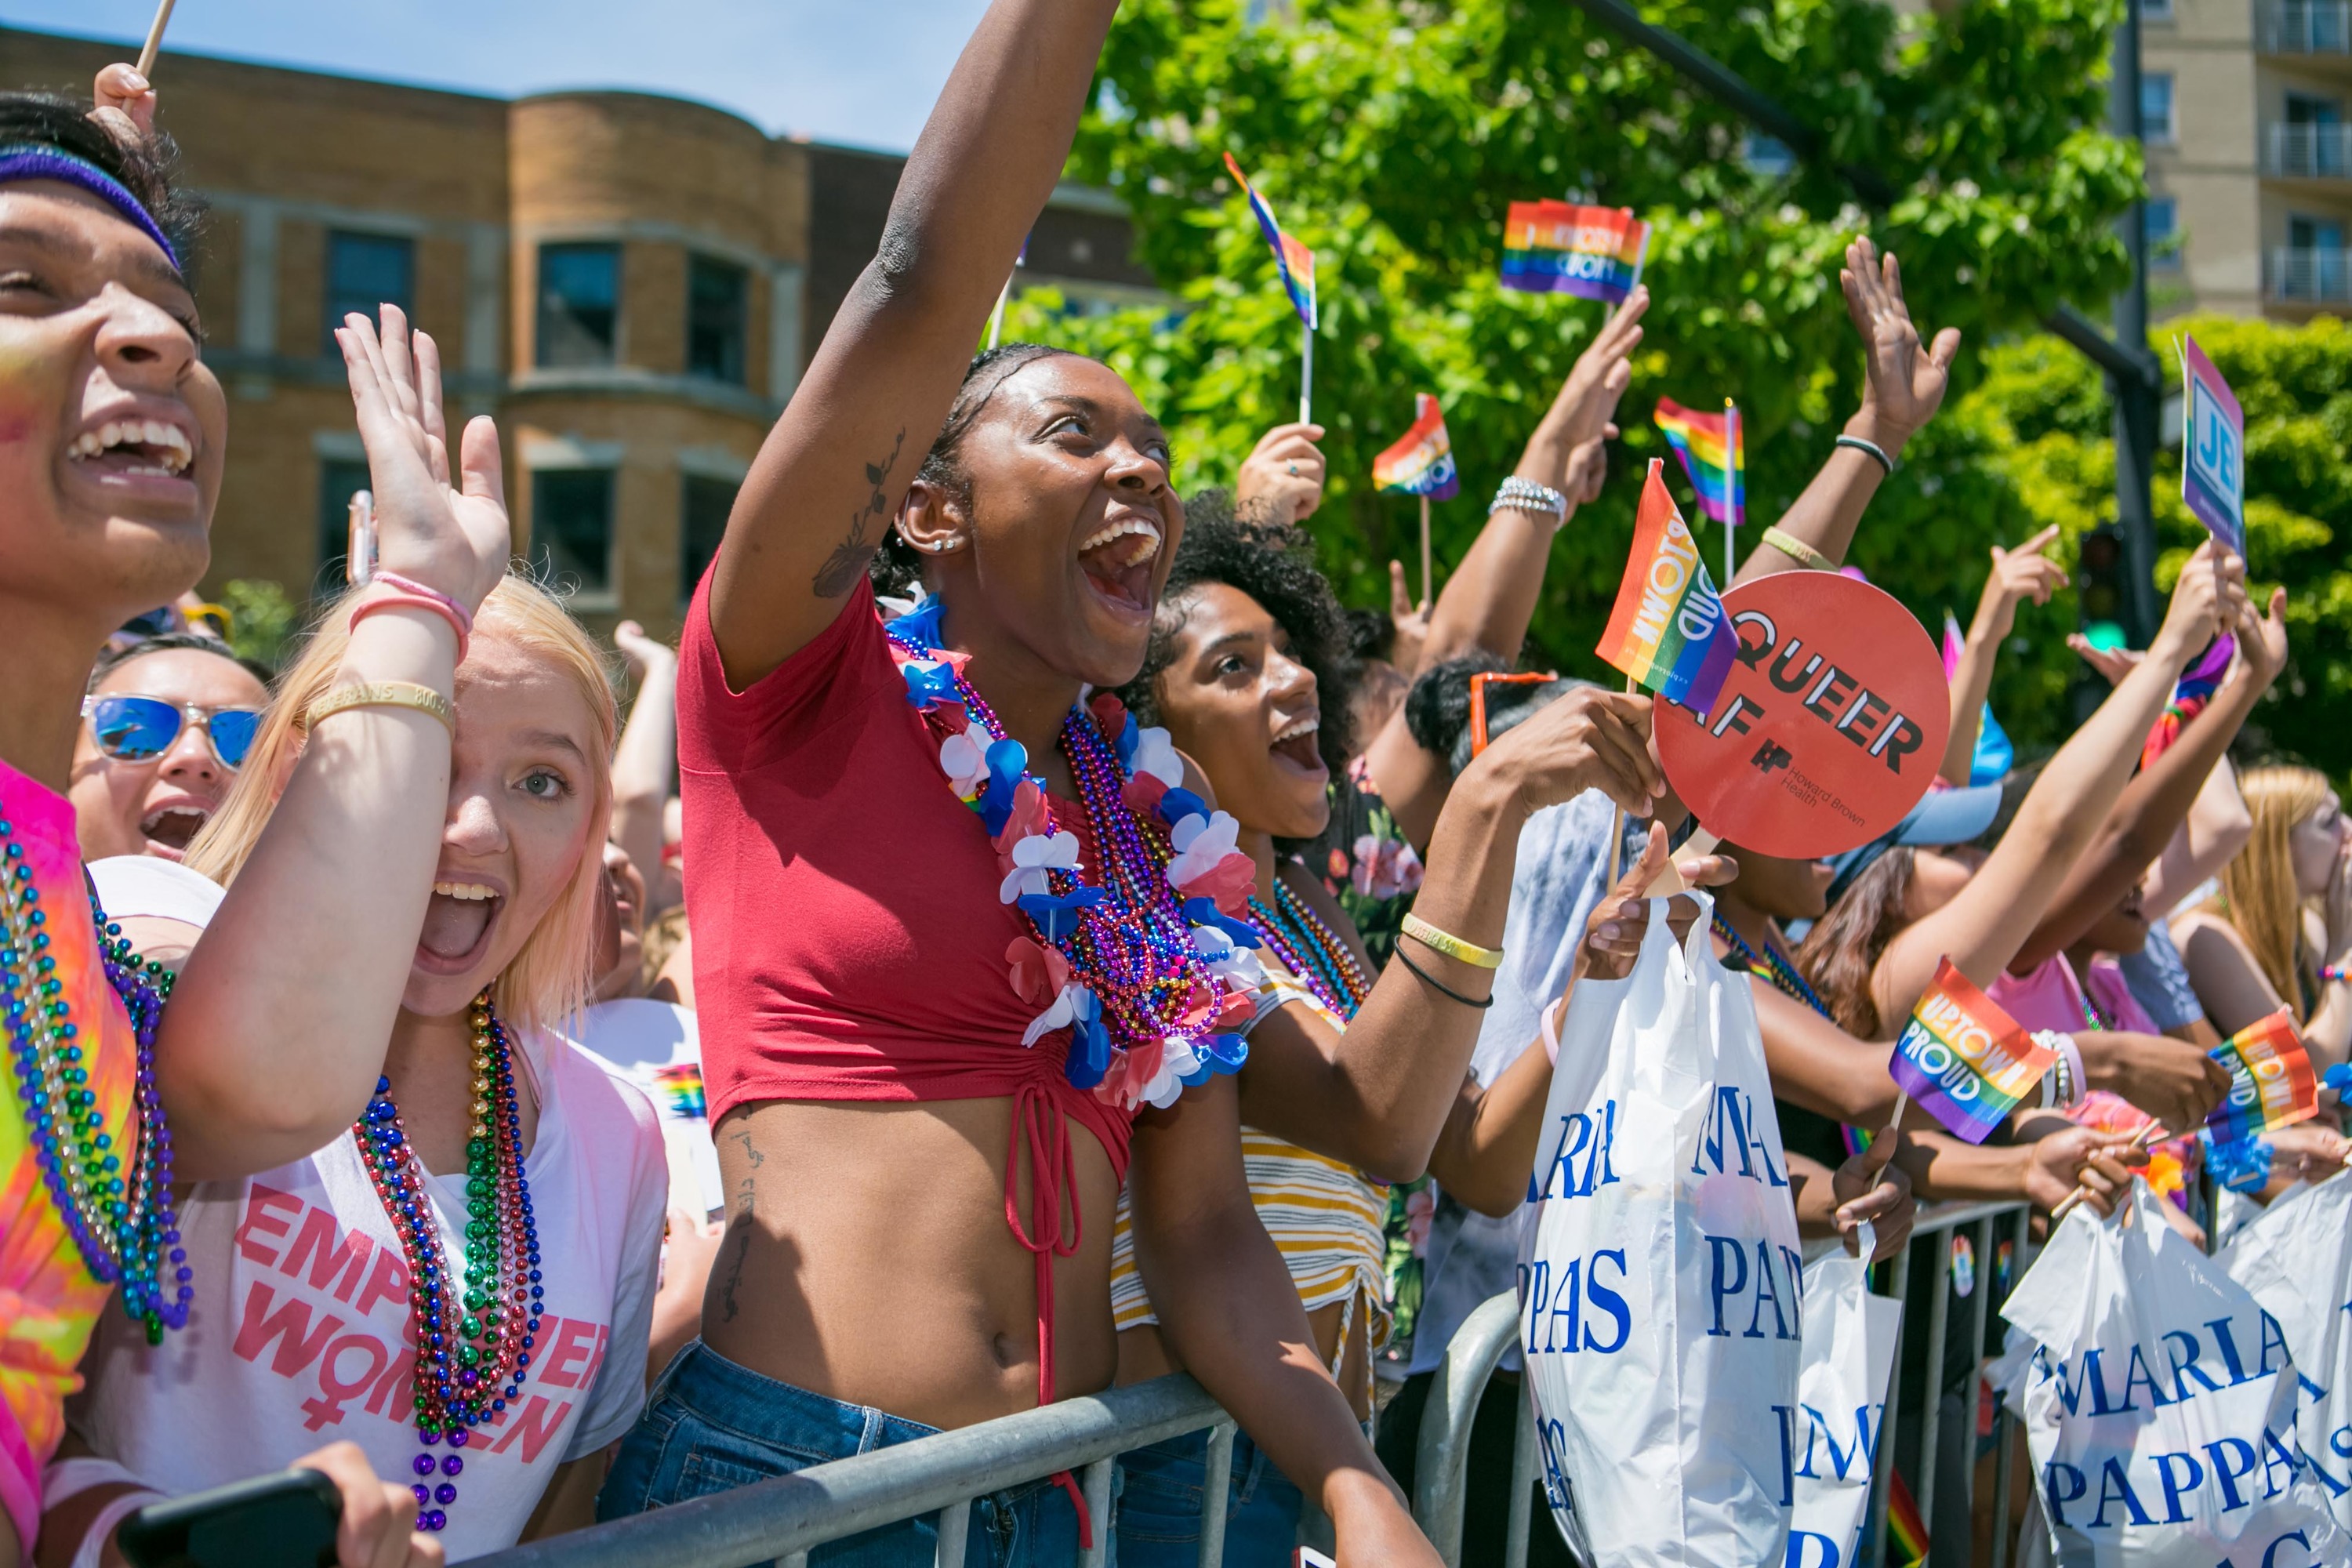 pictures of gay pride parade